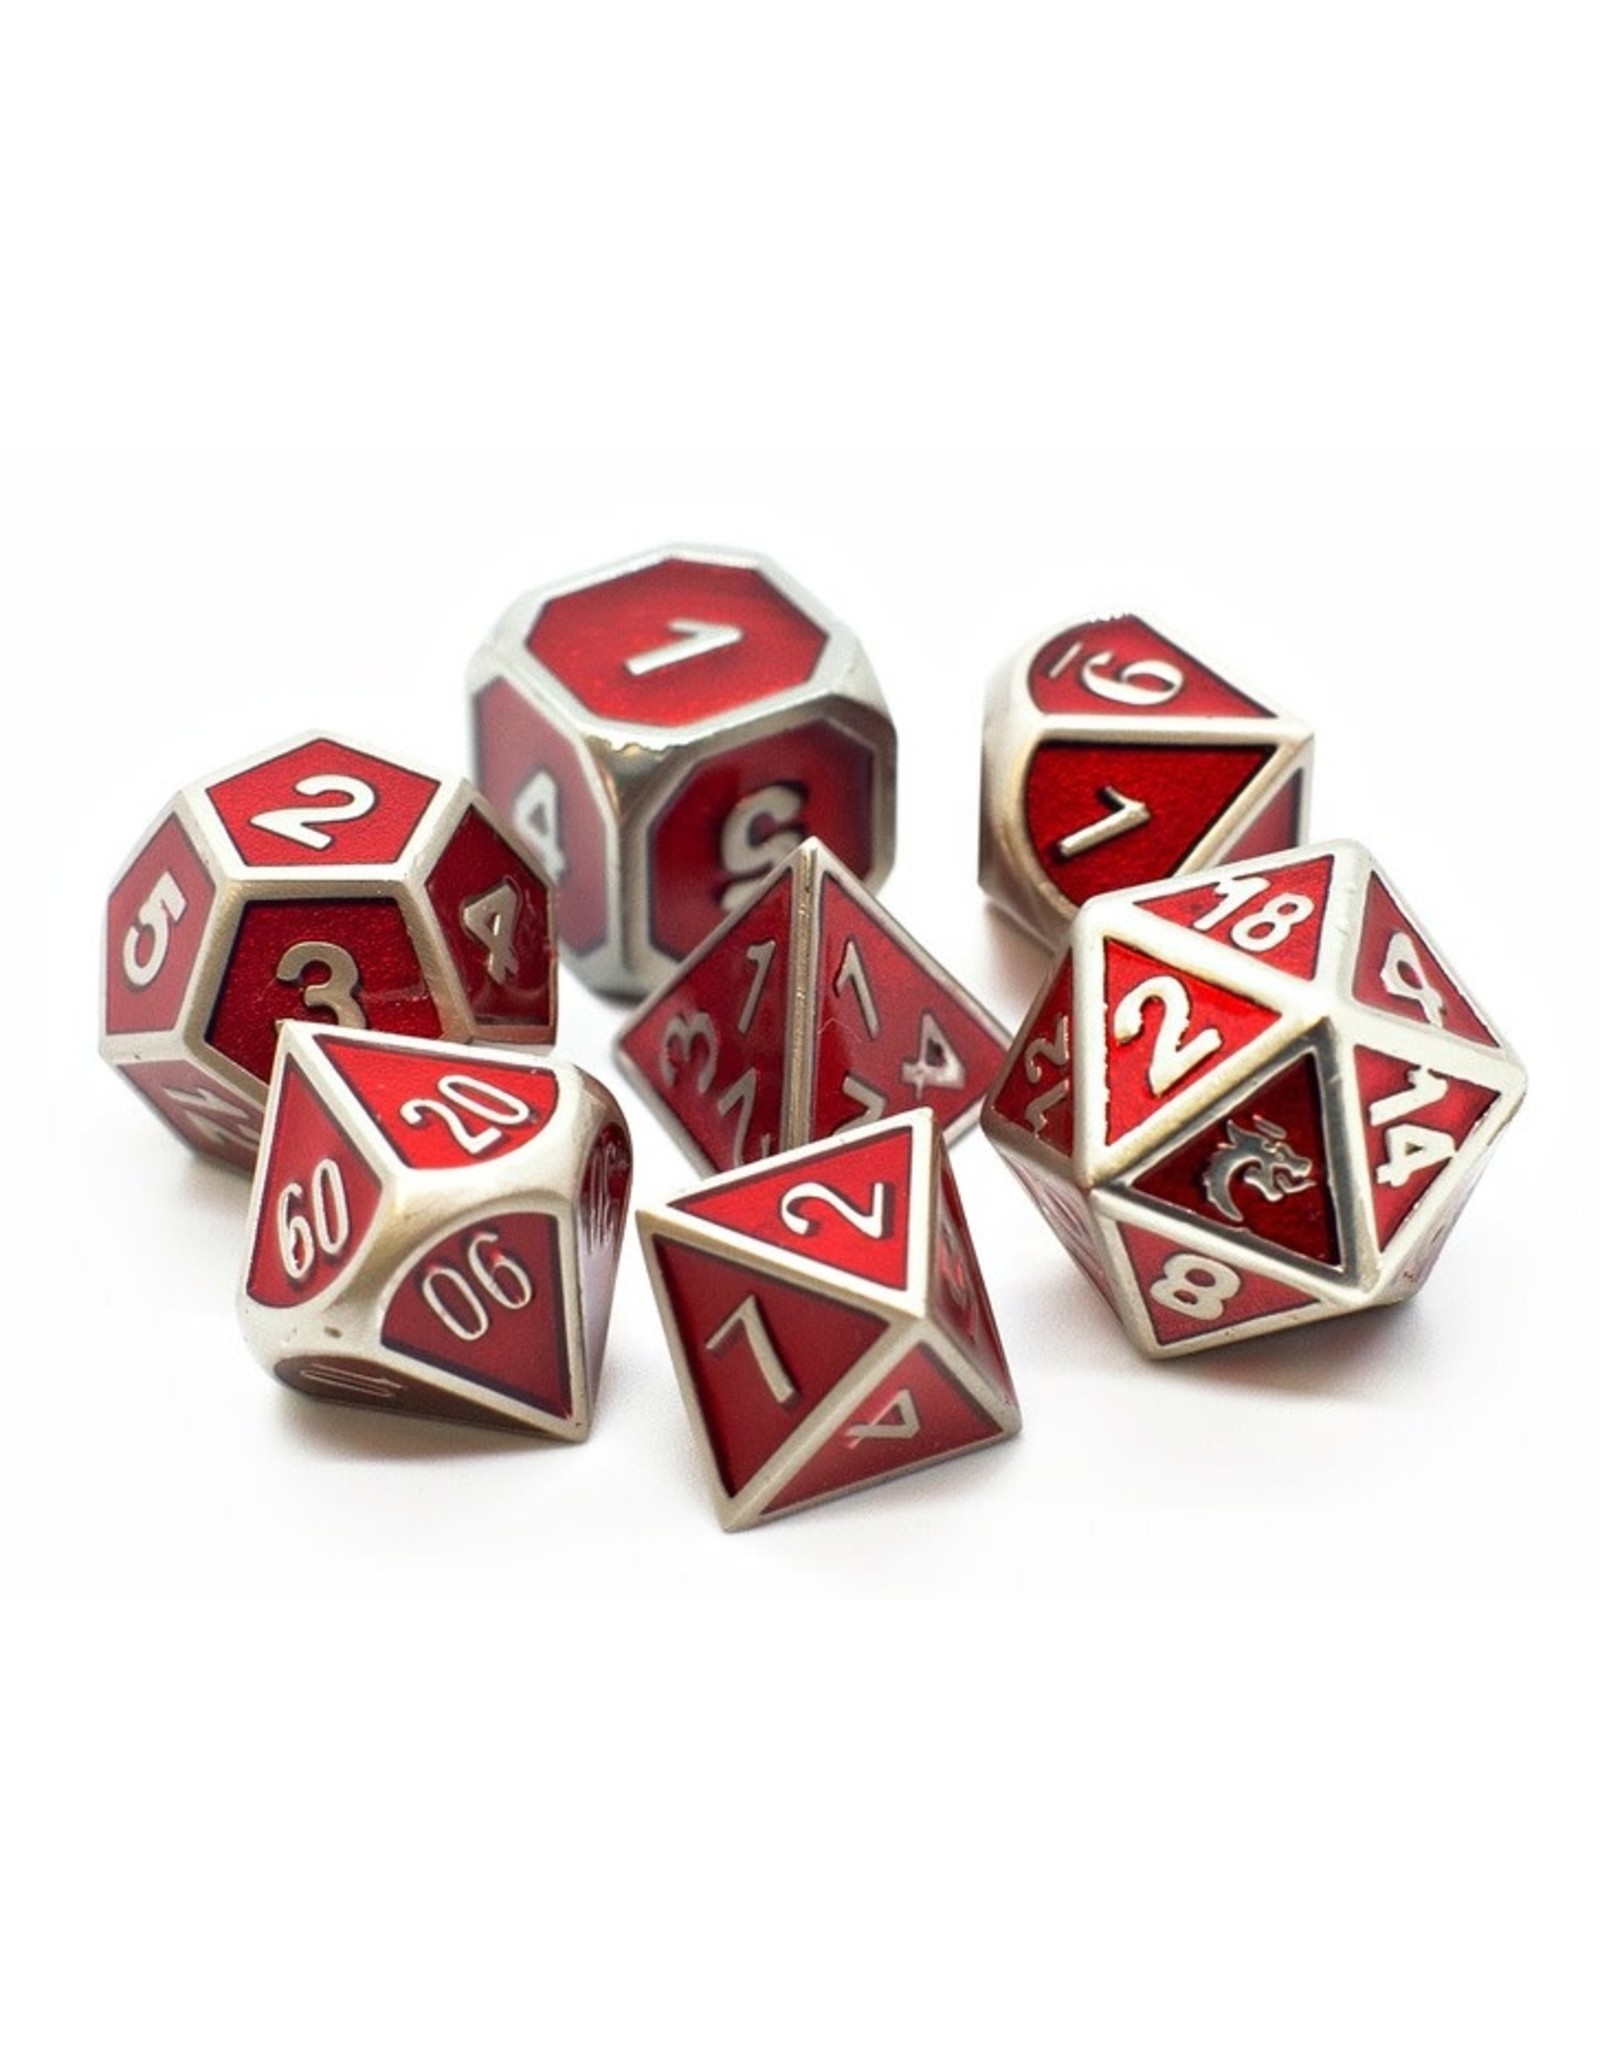 Old School Dice 7 Piece DnD RPG Metal Dice Set: Elven Forged - Metallic Red